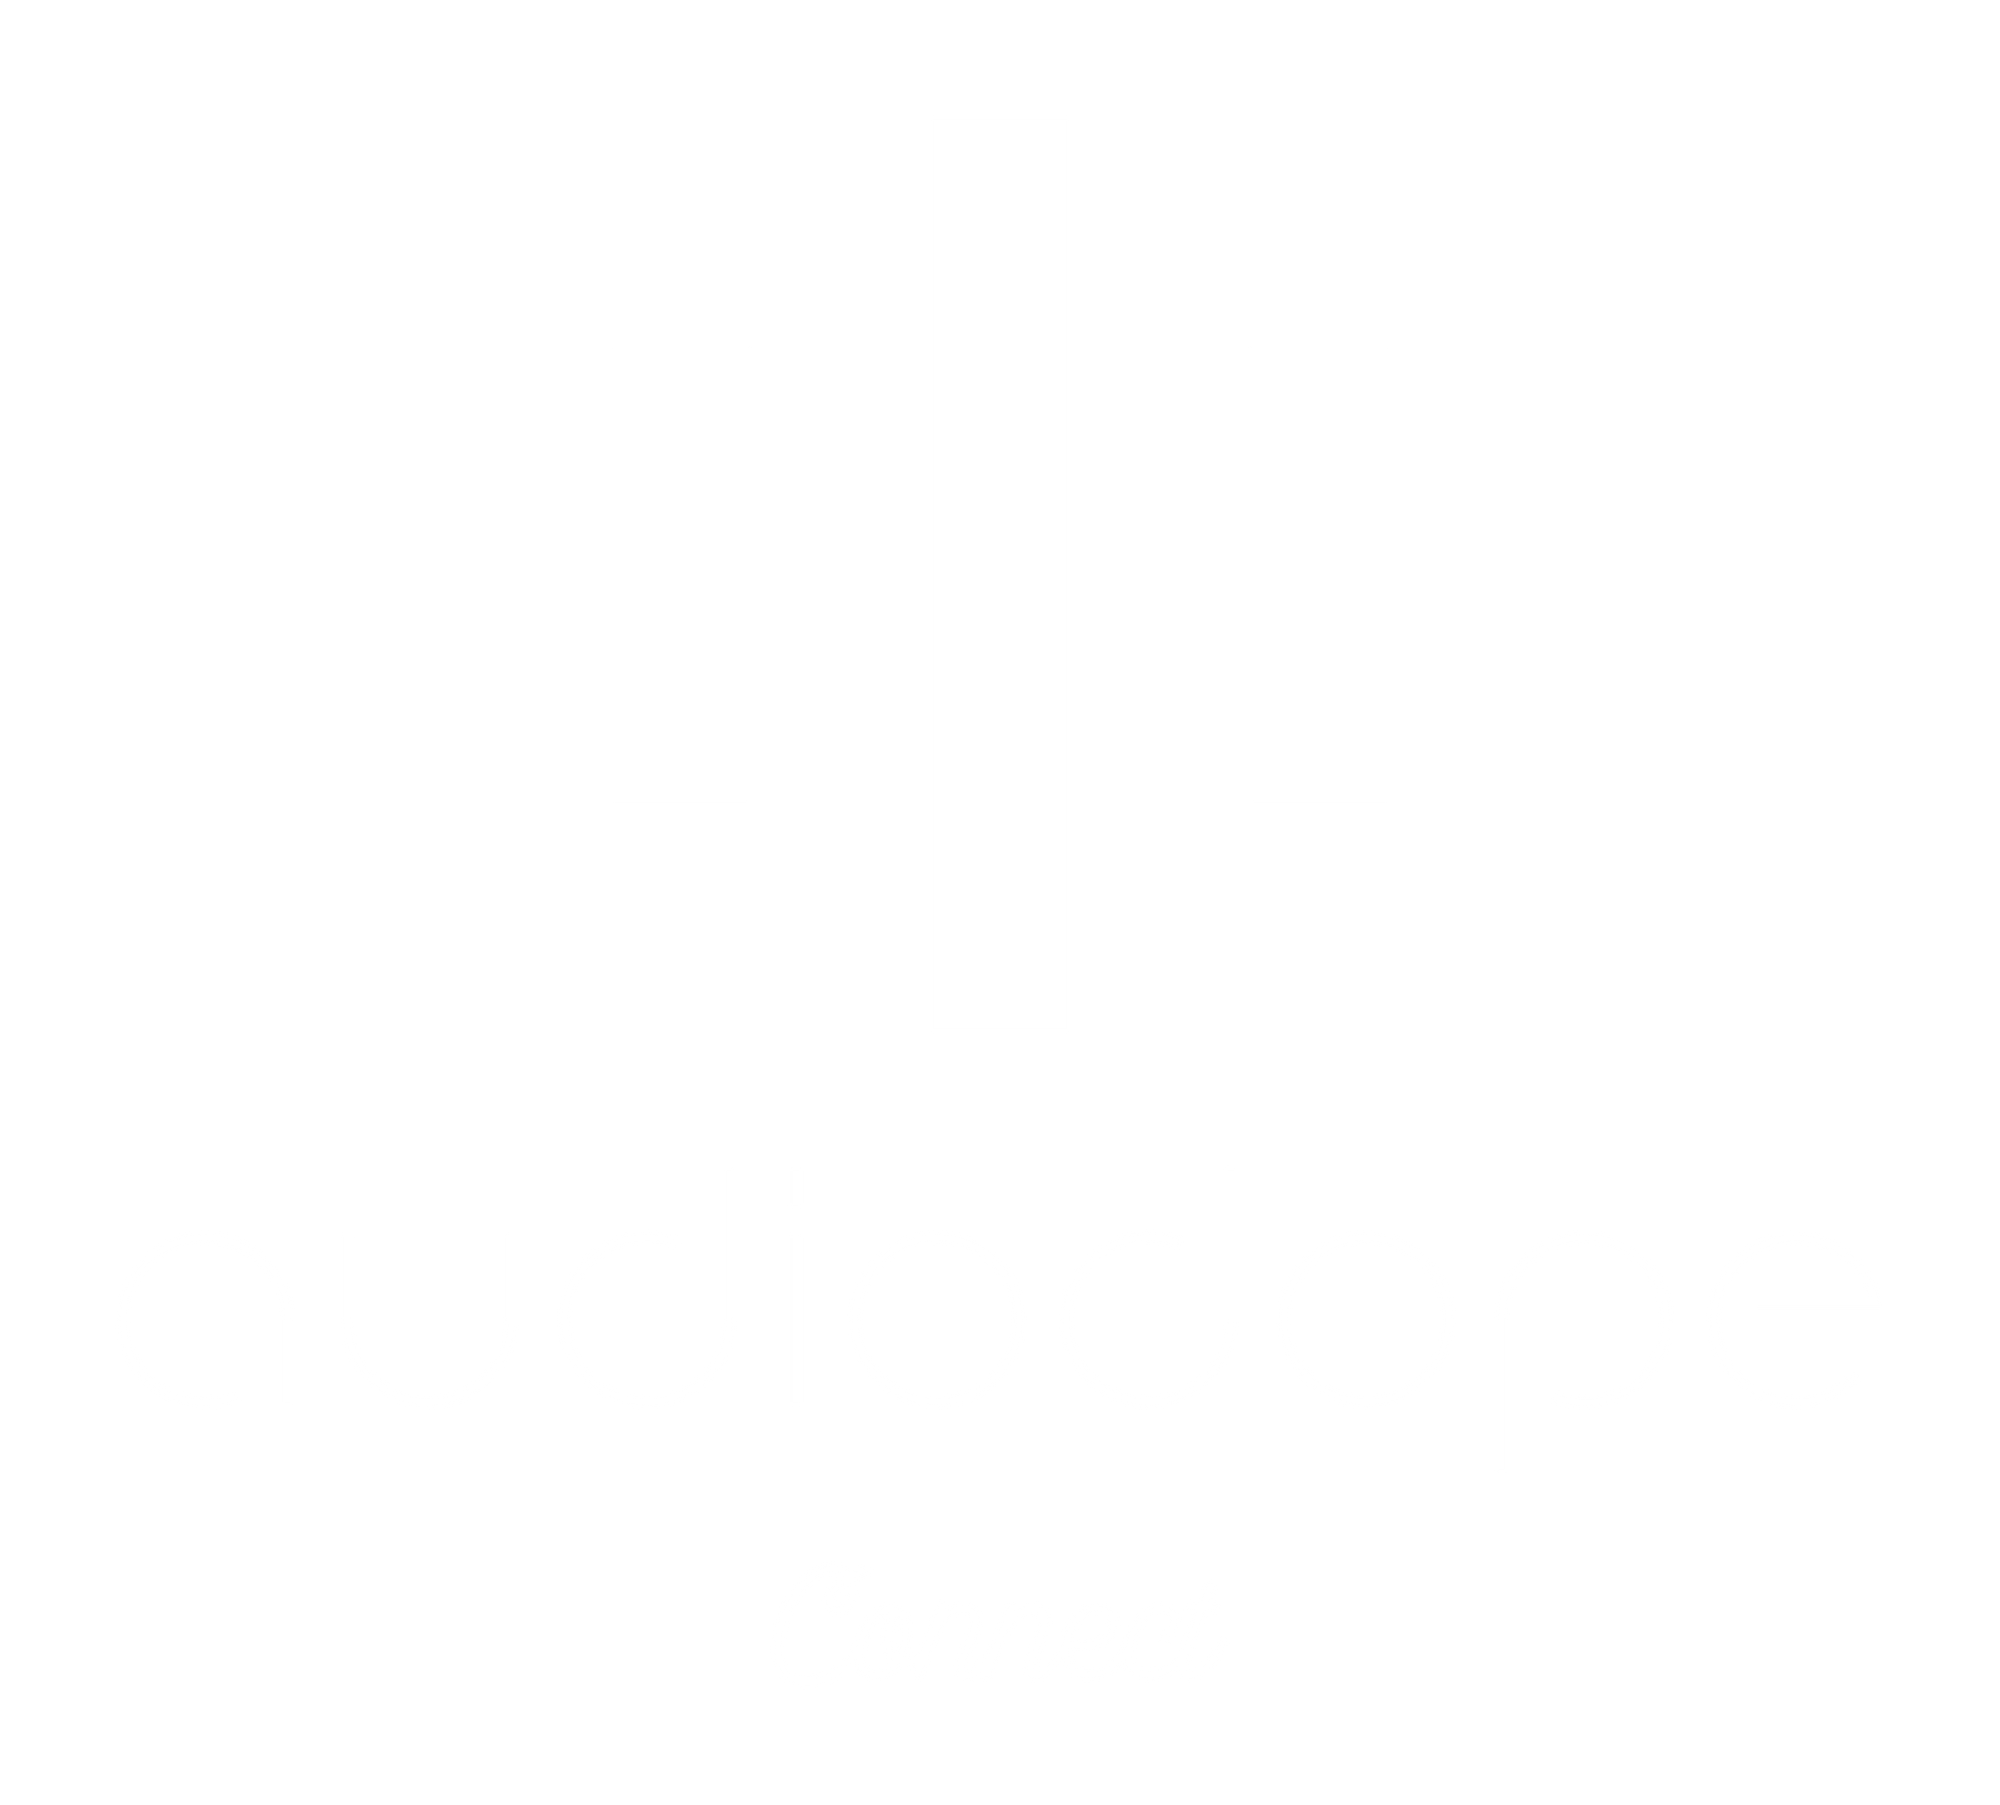 AudioDope Connect